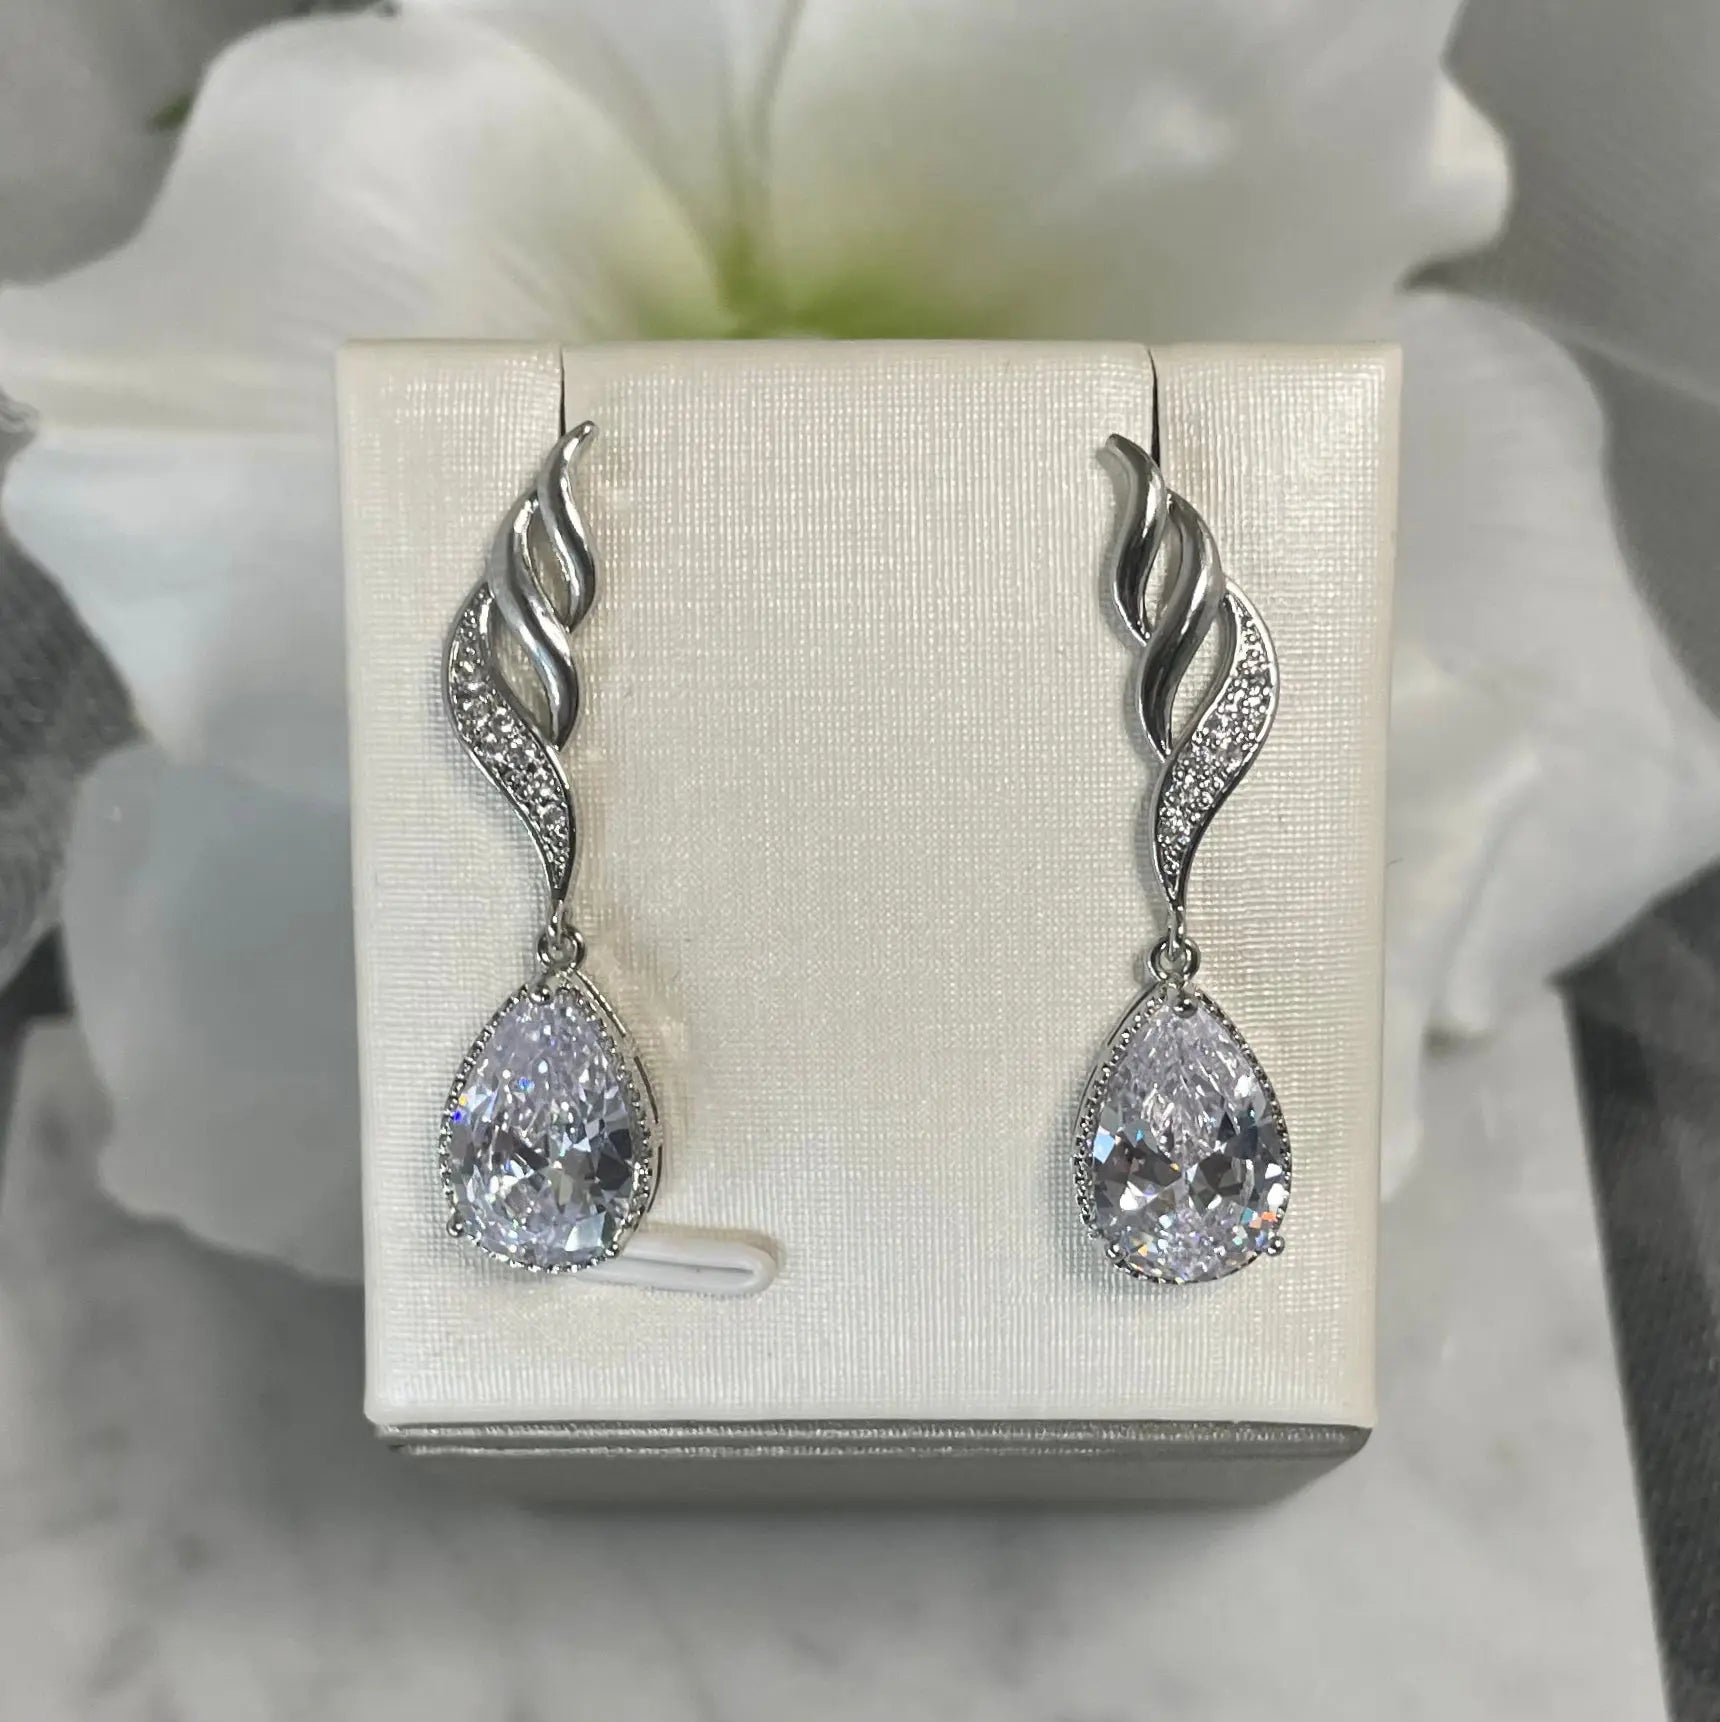 Marie crystal earrings featuring a three-wave design with delicate crystals and a teardrop pendant, available in 18k gold/Silver and Rose gold platings.